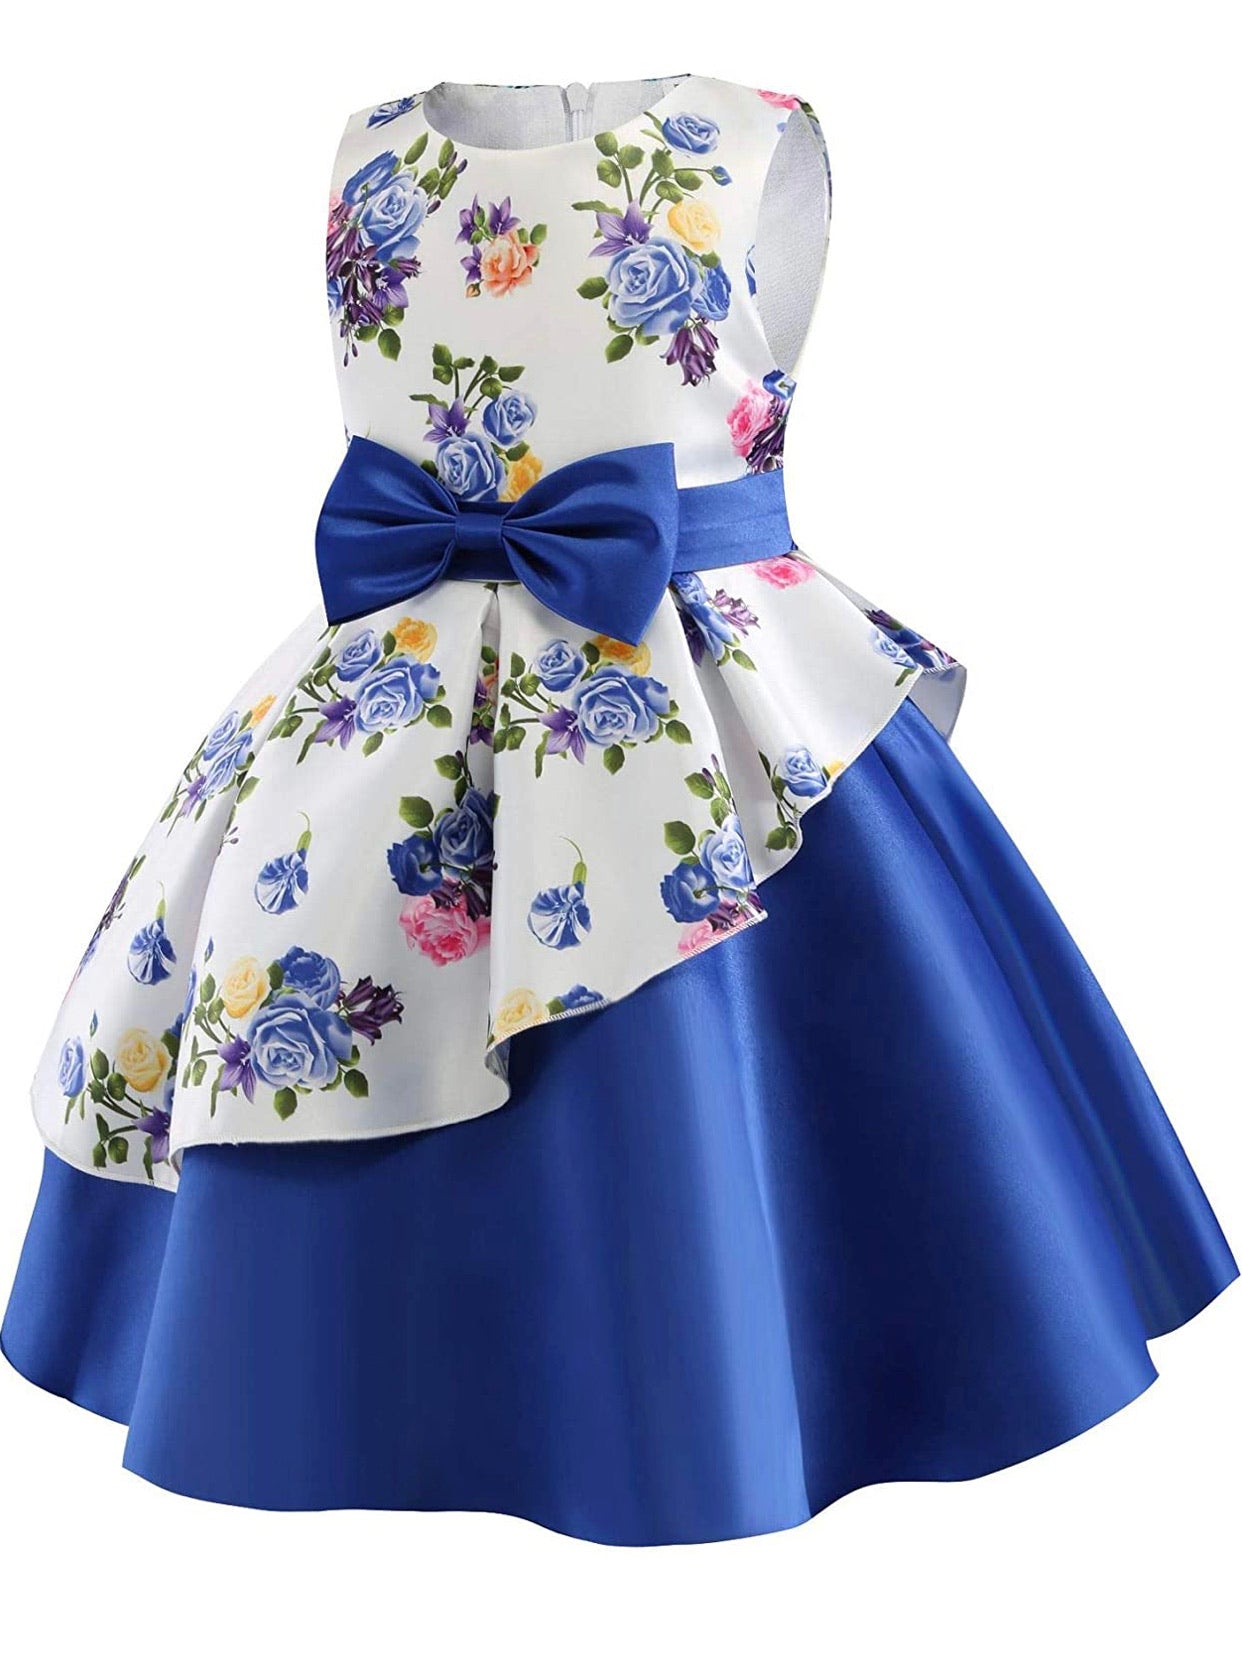 Little Girl’s Formal Floral Print Dress, Sizes 2T - 9 years (Royal Blue)